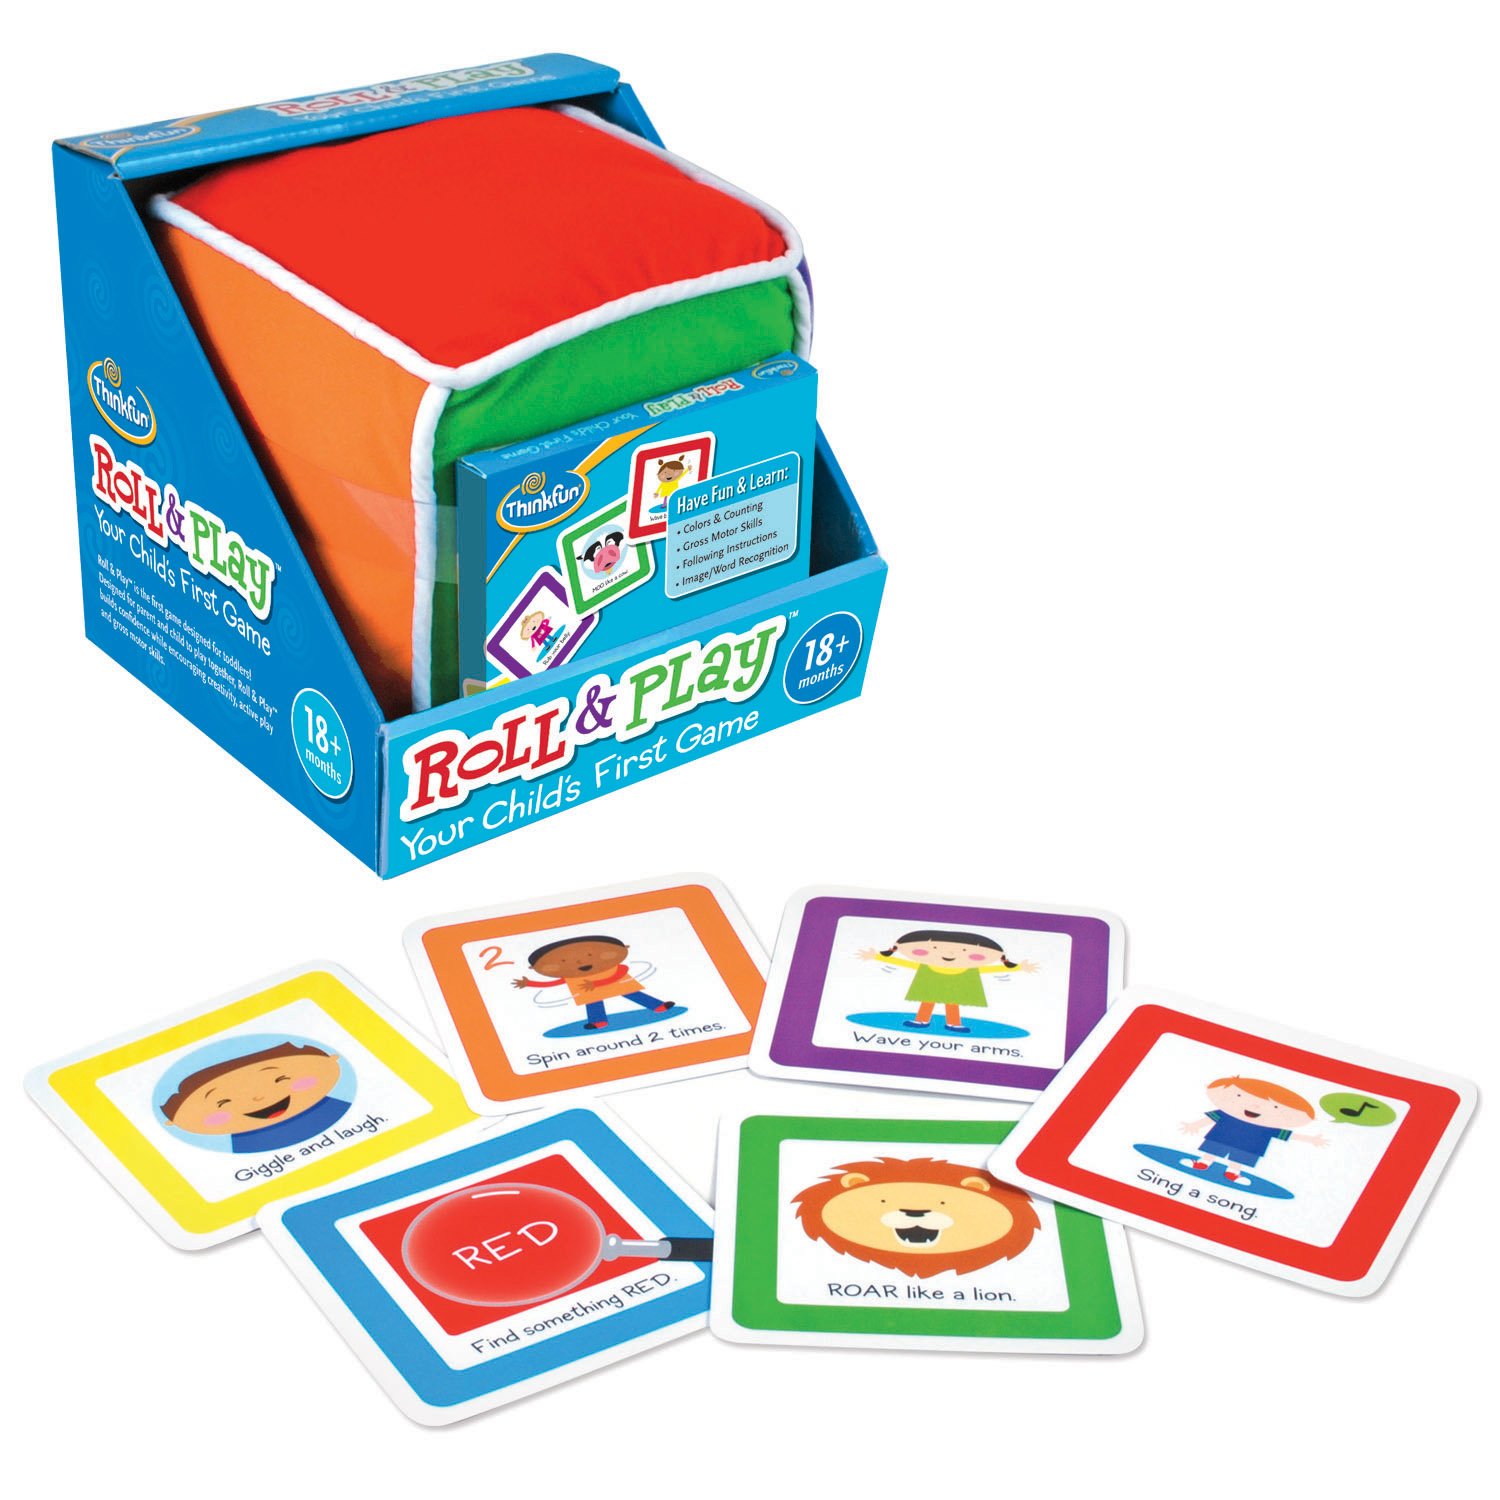 ThinkFun Roll and Play Game for Toddlers - Your Child's First Game! Award Winning and Fun Toddler Game for Parents and Kids